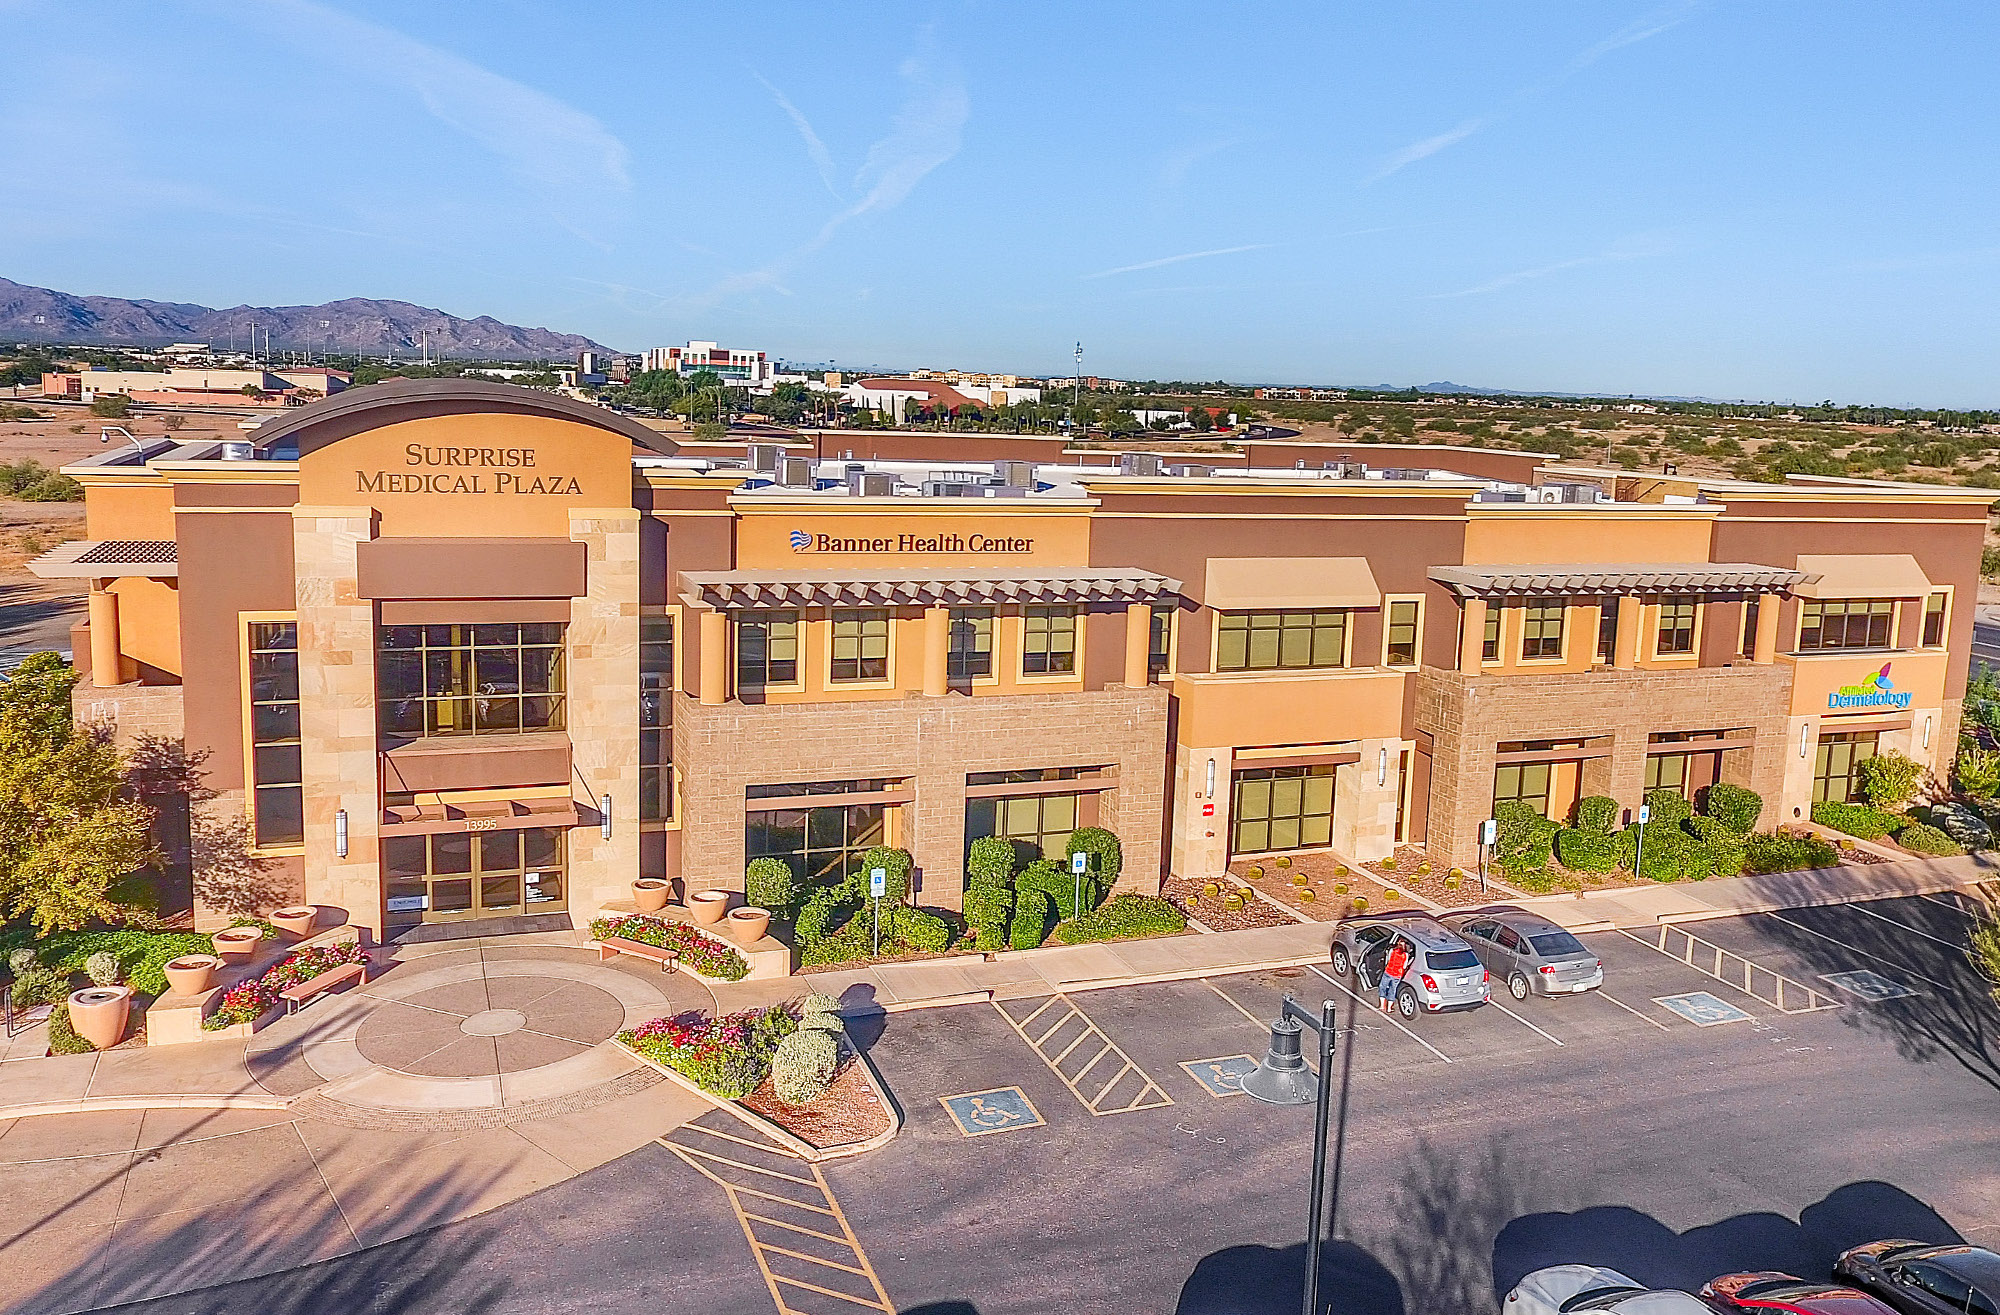 Griffin-American Healthcare REIT IV Buys Medical Office Building Near Phoenix